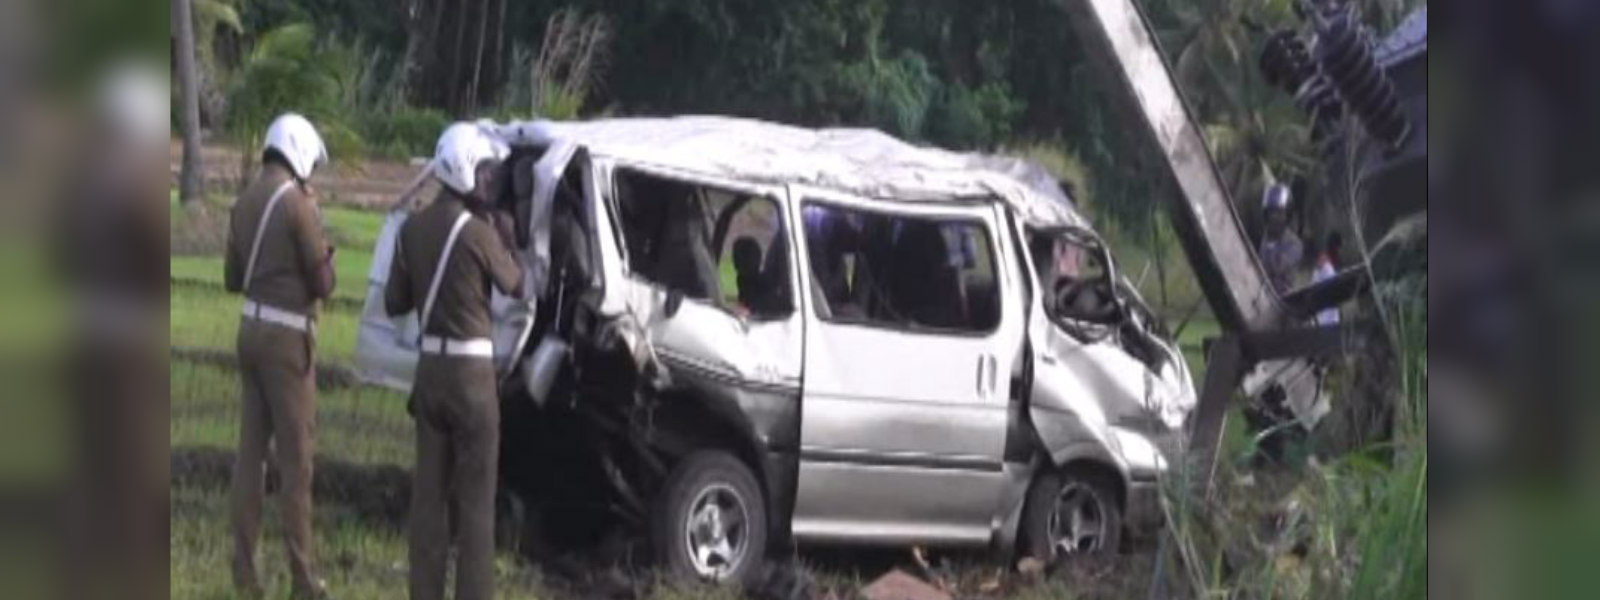 Accident in Bulugala injures 12